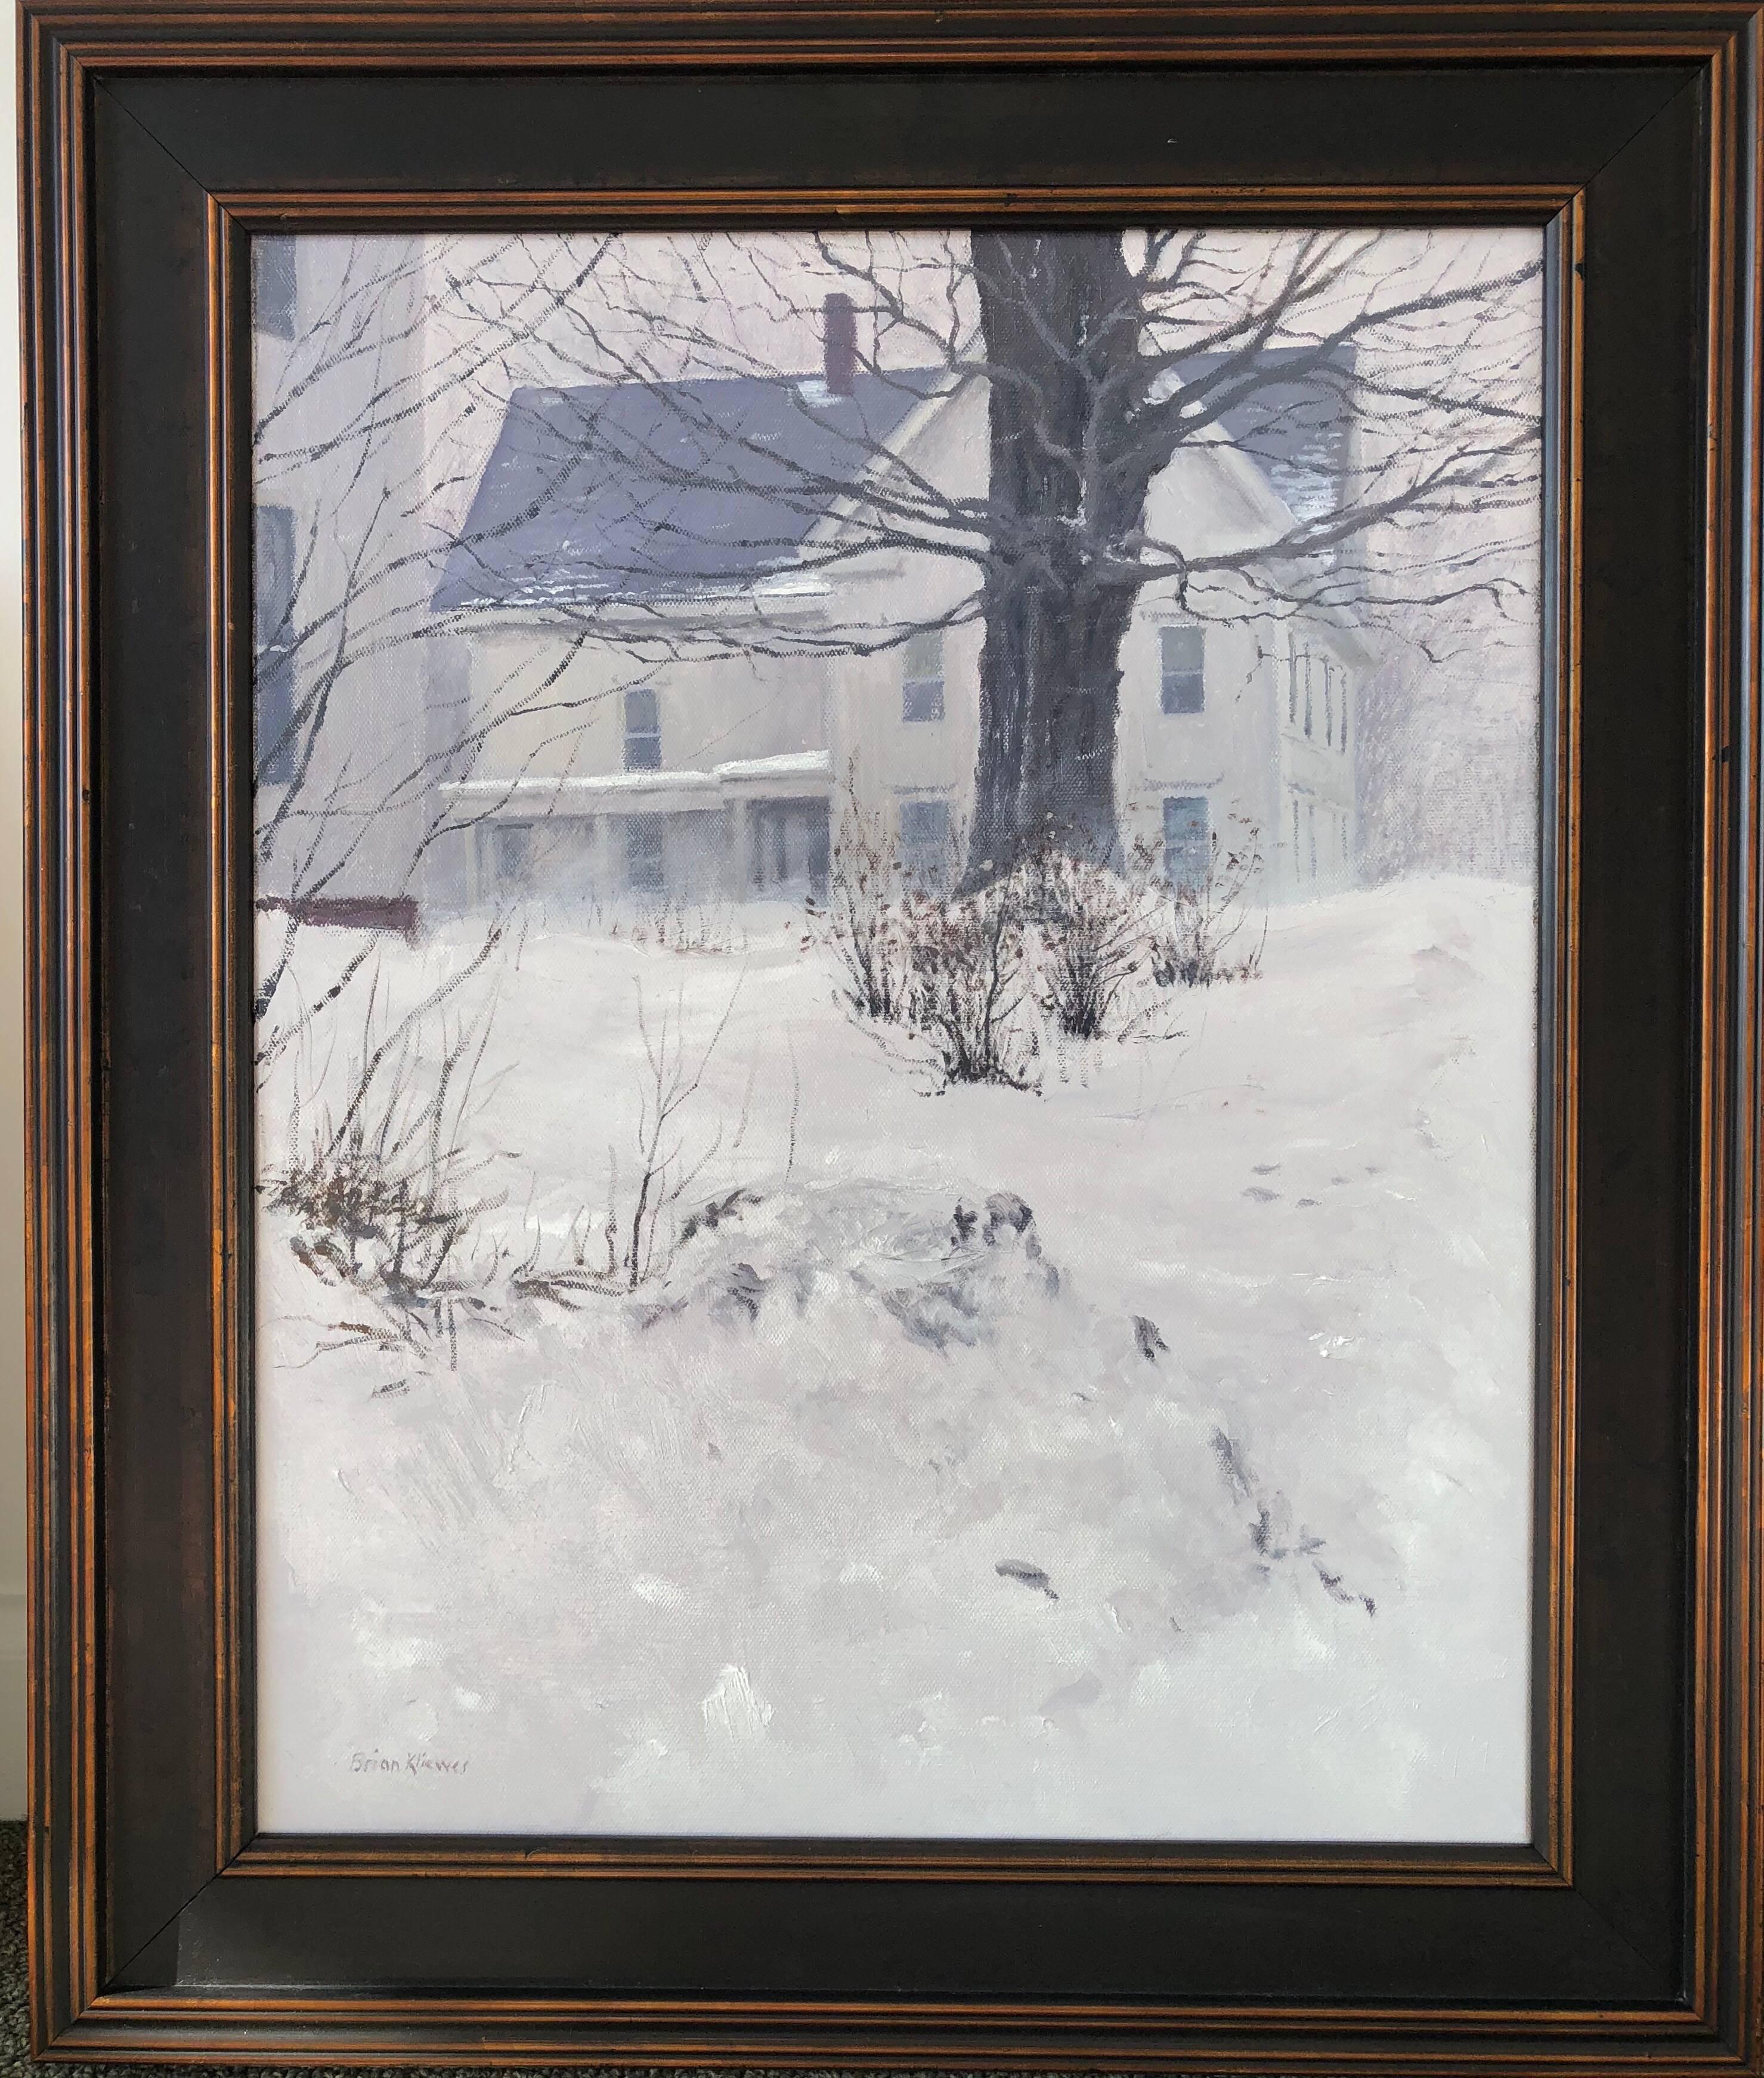 Nor’easter - Painting by Brian Kliewer